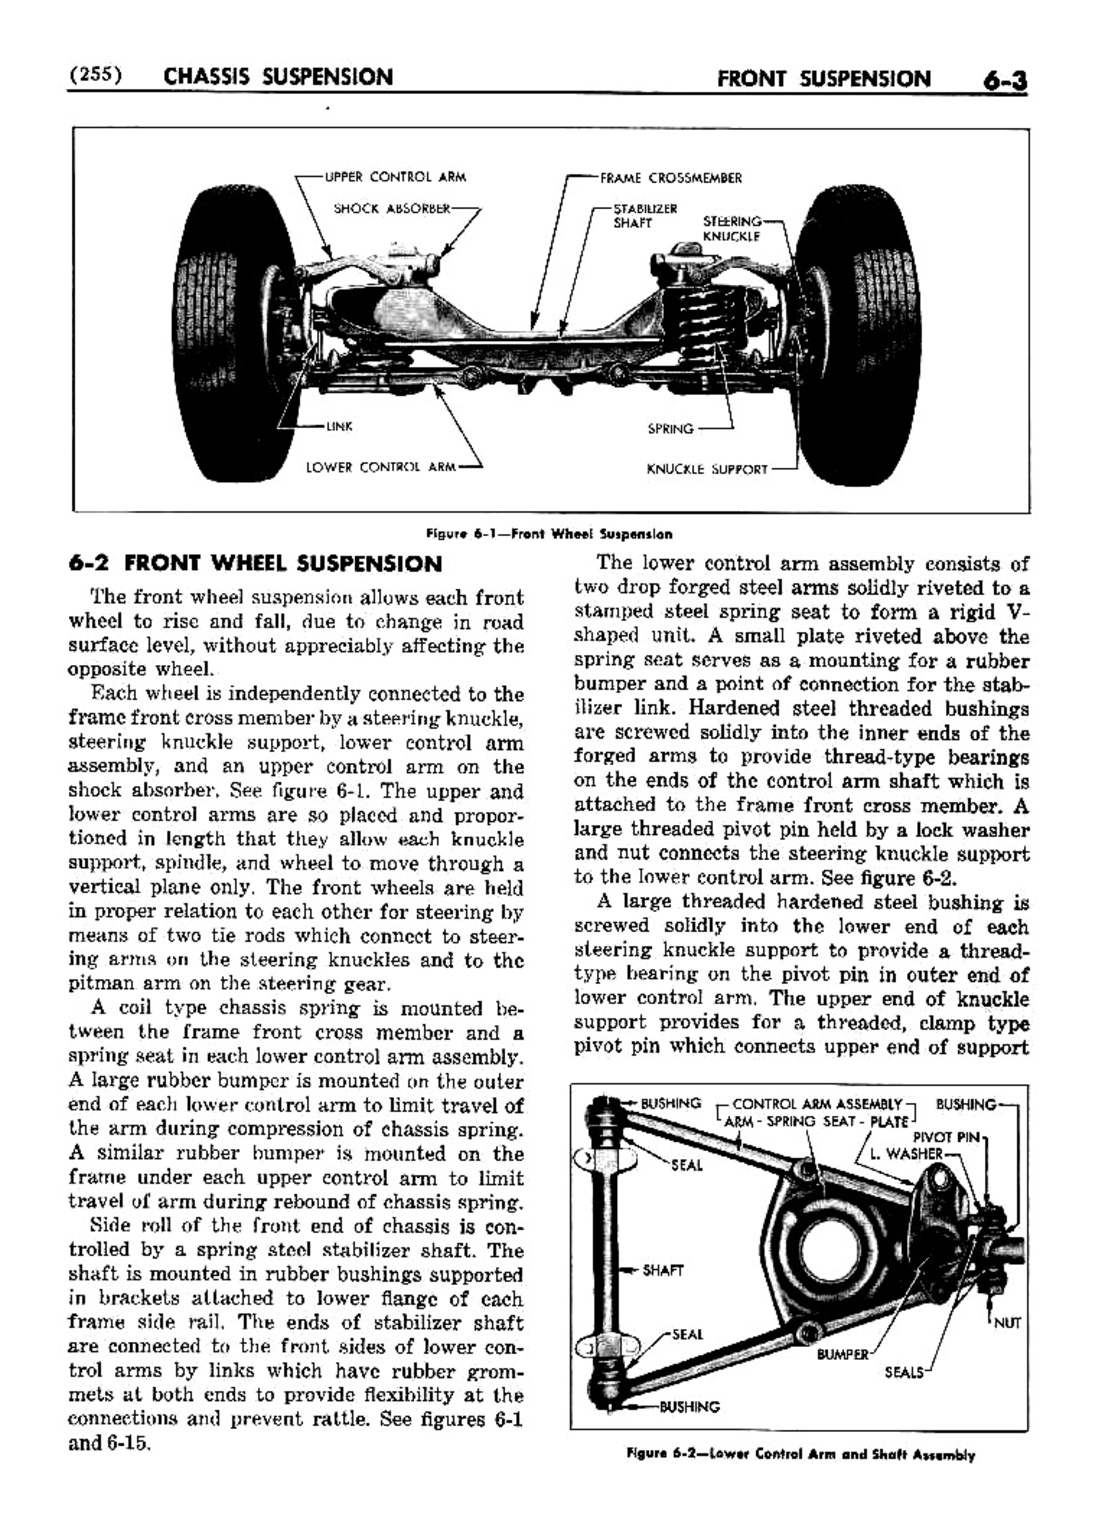 n_07 1952 Buick Shop Manual - Chassis Suspension-003-003.jpg